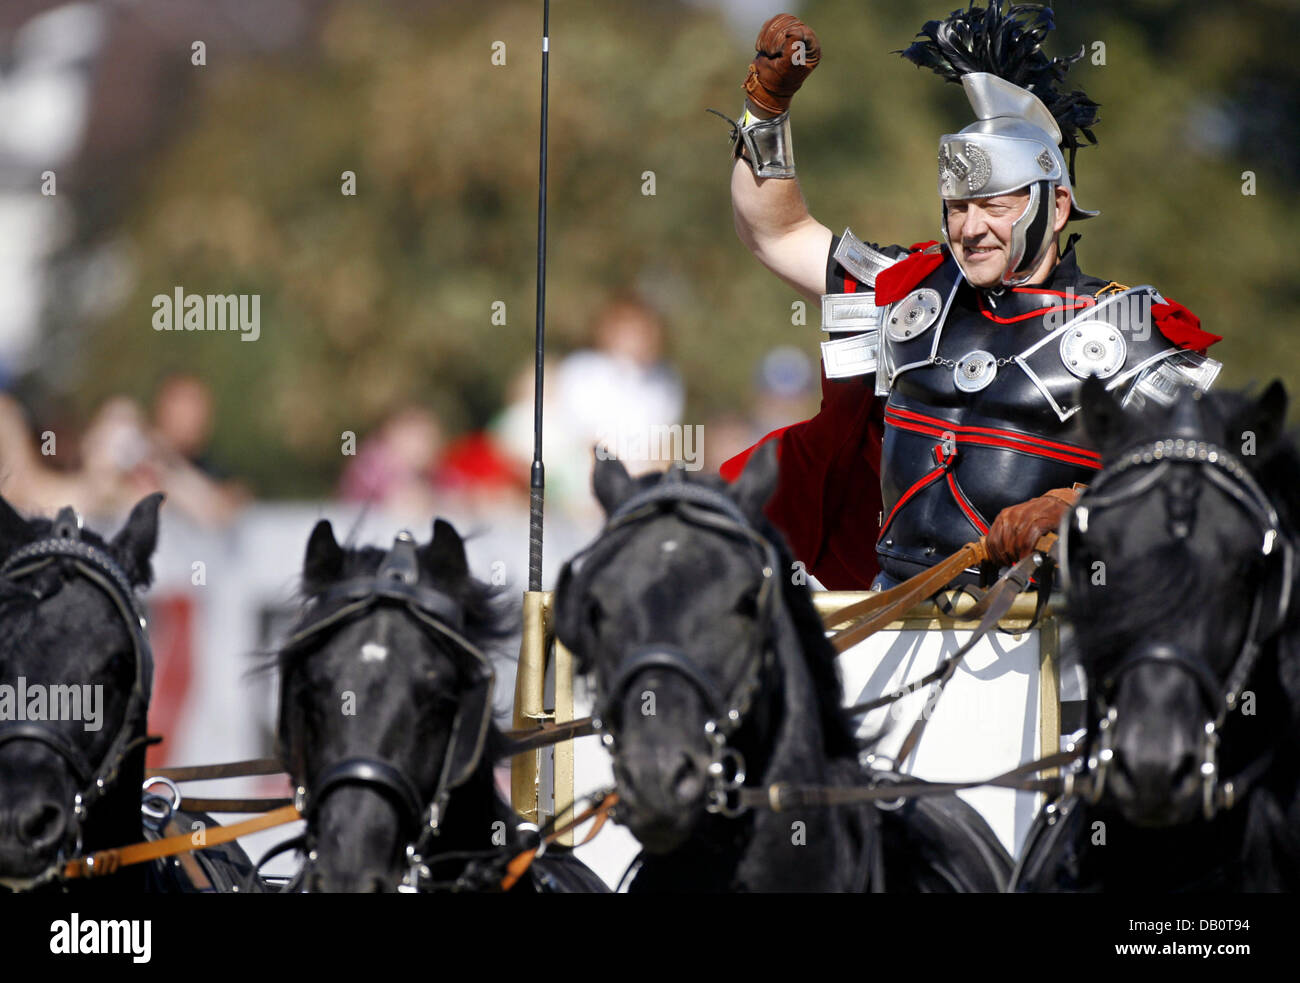 A charioteer on his quadriga greets the spectators during the 'Great Chariot Race of Ben Hur' in Berlin, Germany, 23 September 2007. The race of the quadrigae was the highlight at the event. Photo: Klaus-Dietmar Gabbert Stock Photo